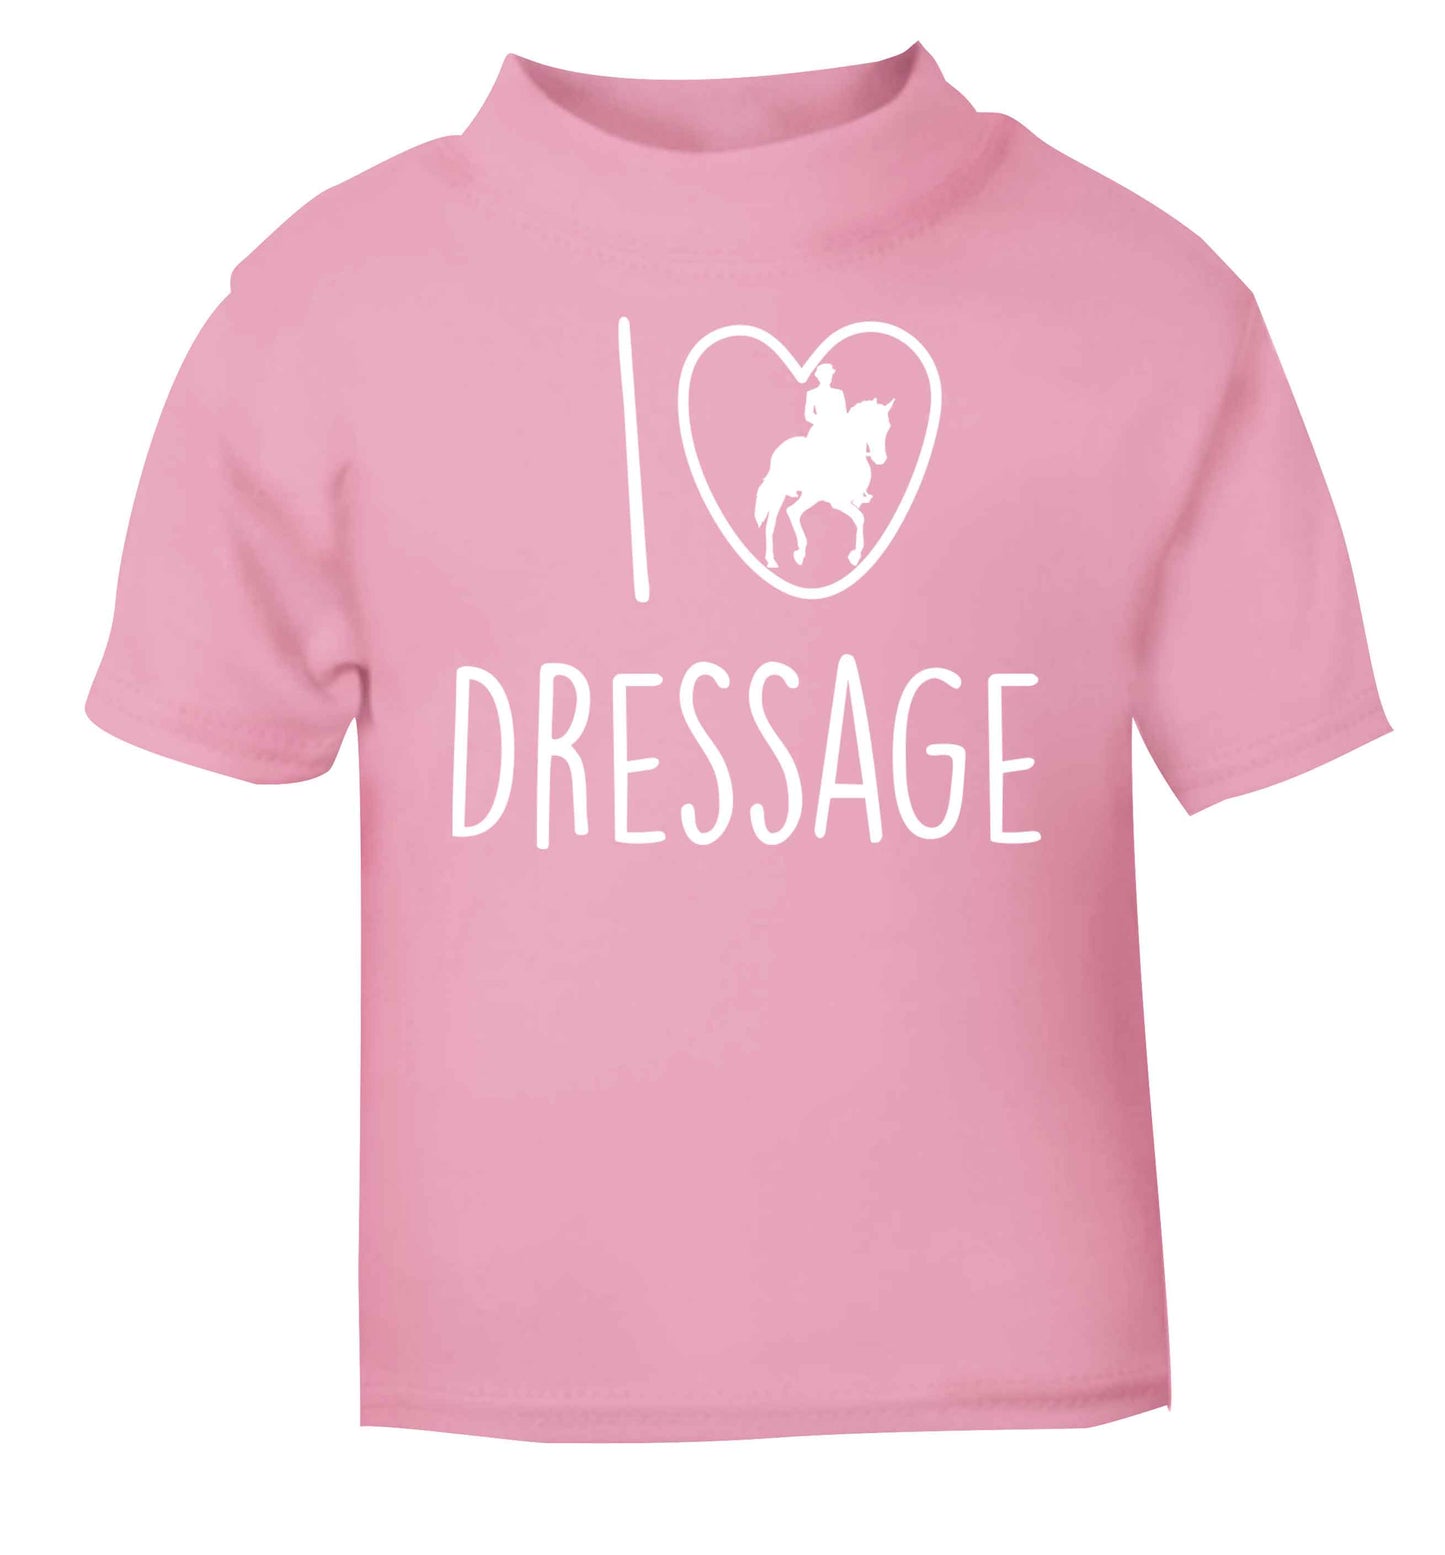 I love dressage light pink baby toddler Tshirt 2 Years